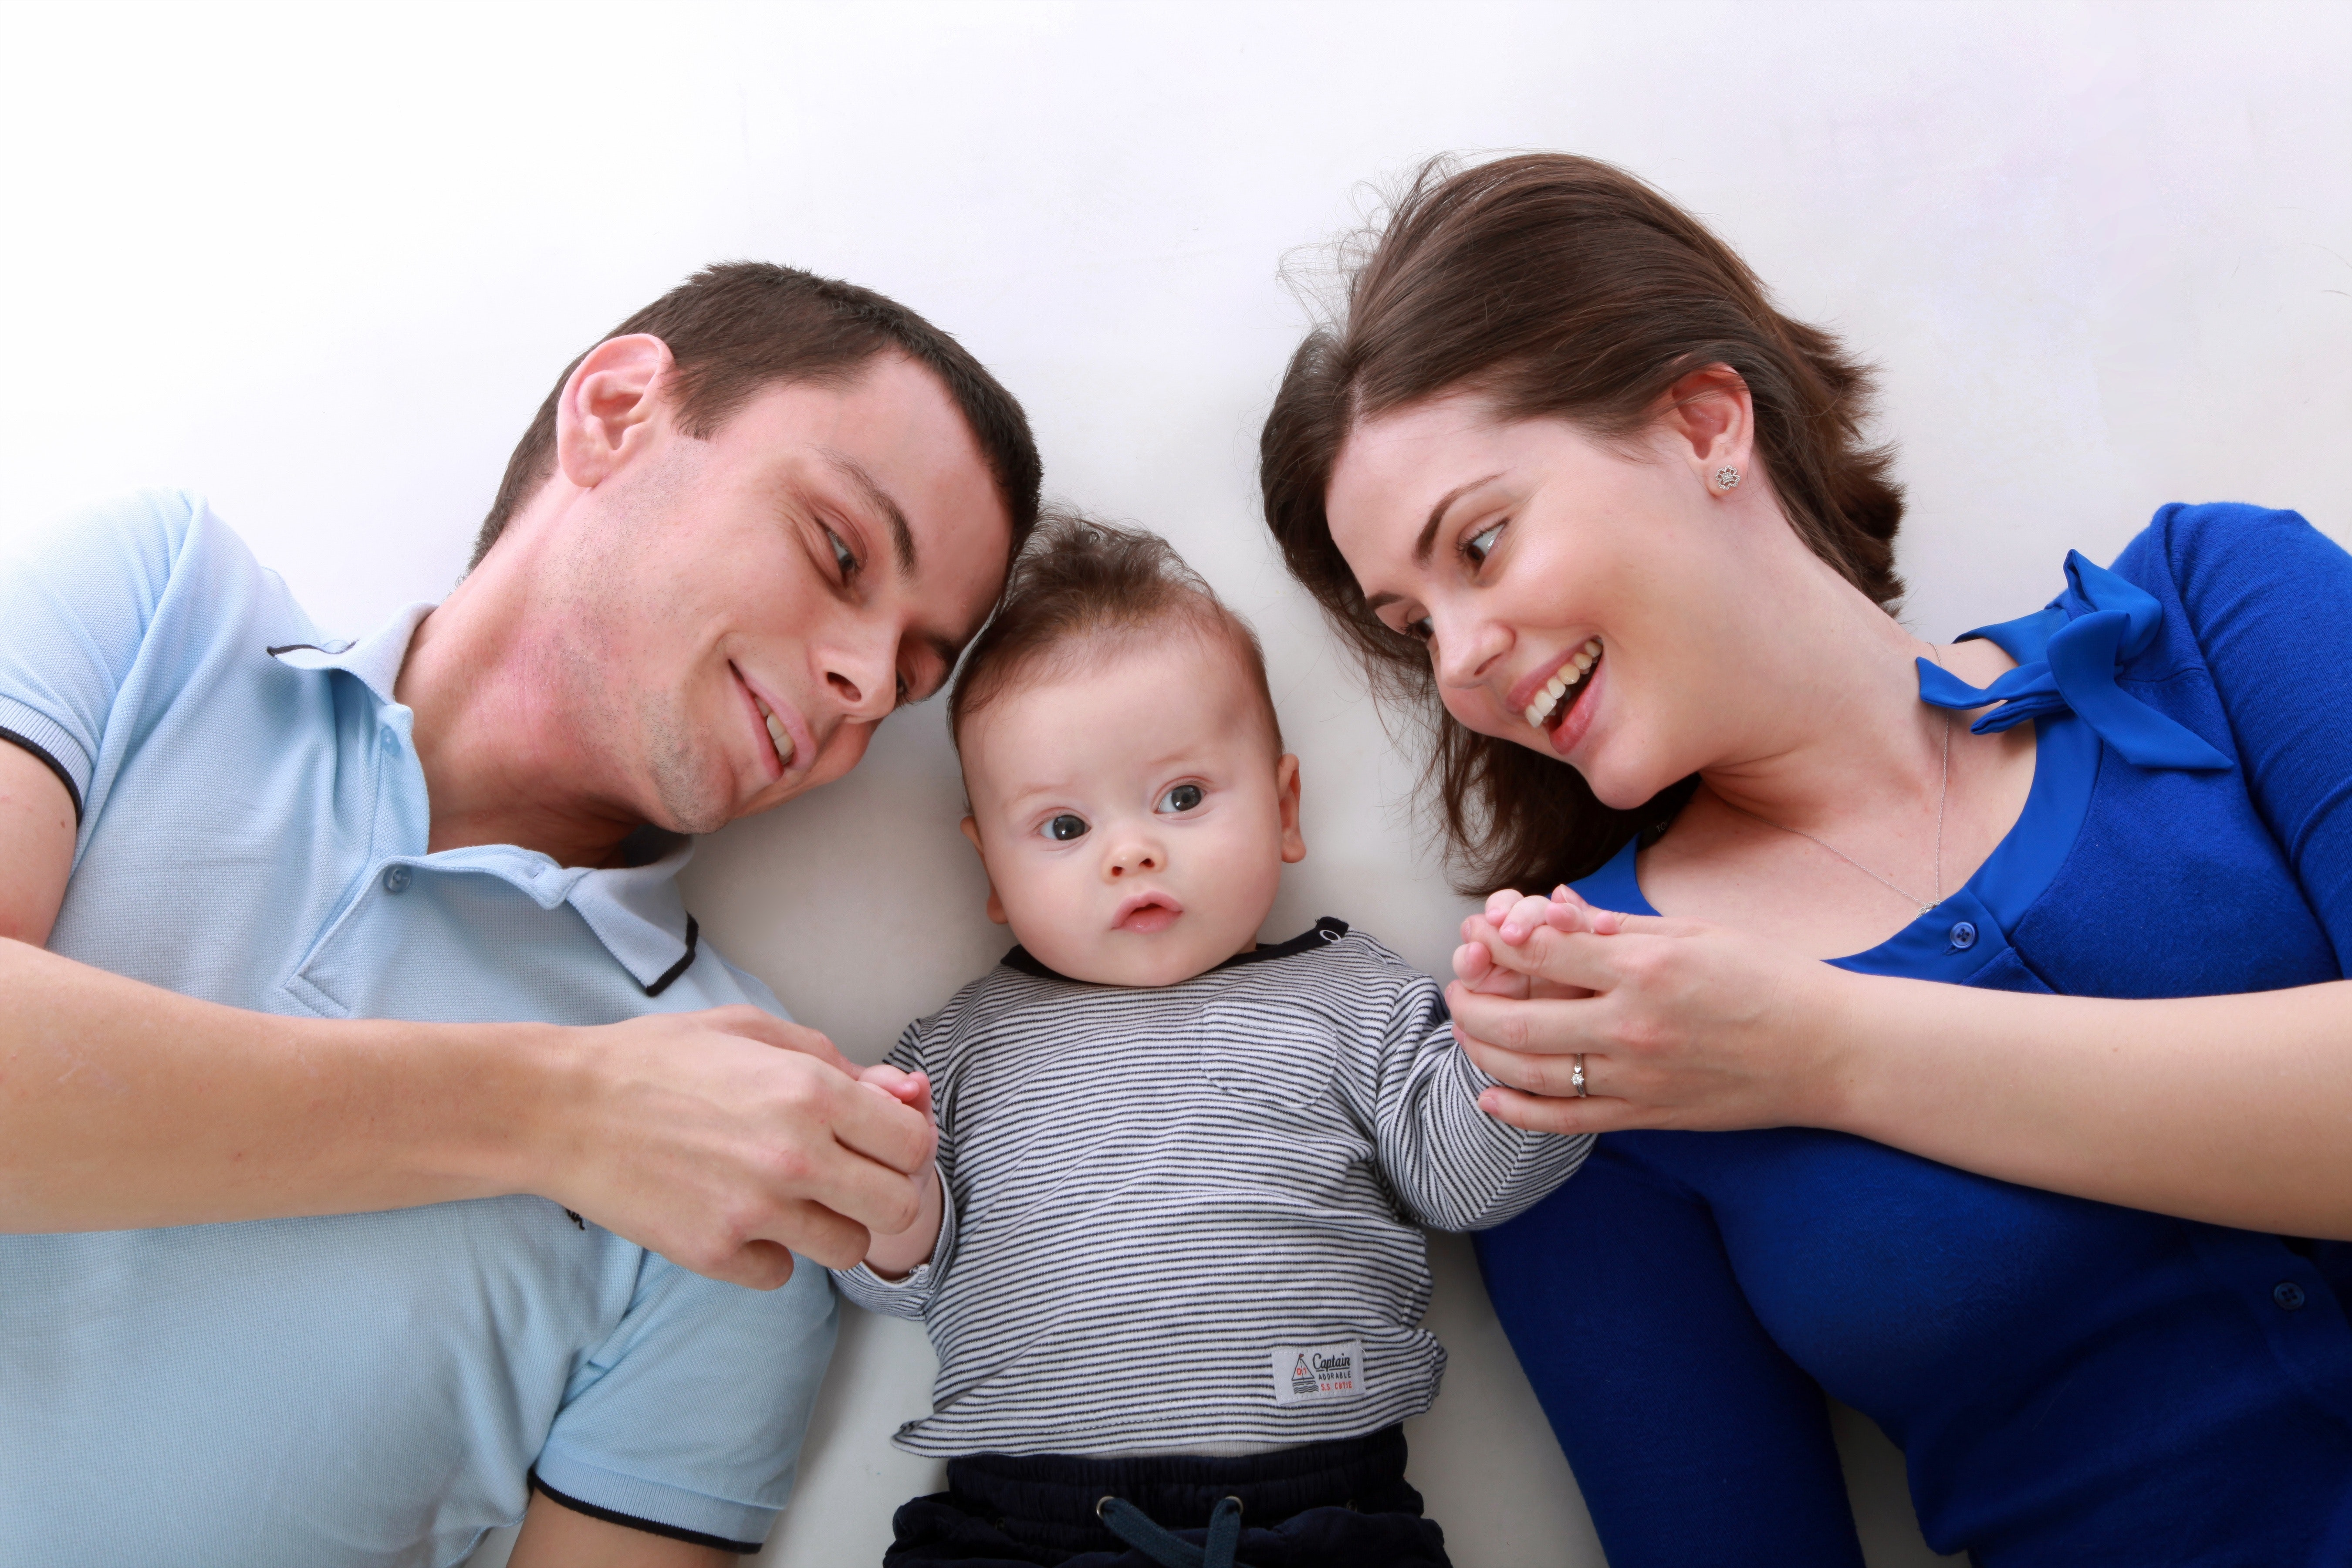 Man Beside Baby and Woman, Affection, Kid, Together, Toddler, HQ Photo